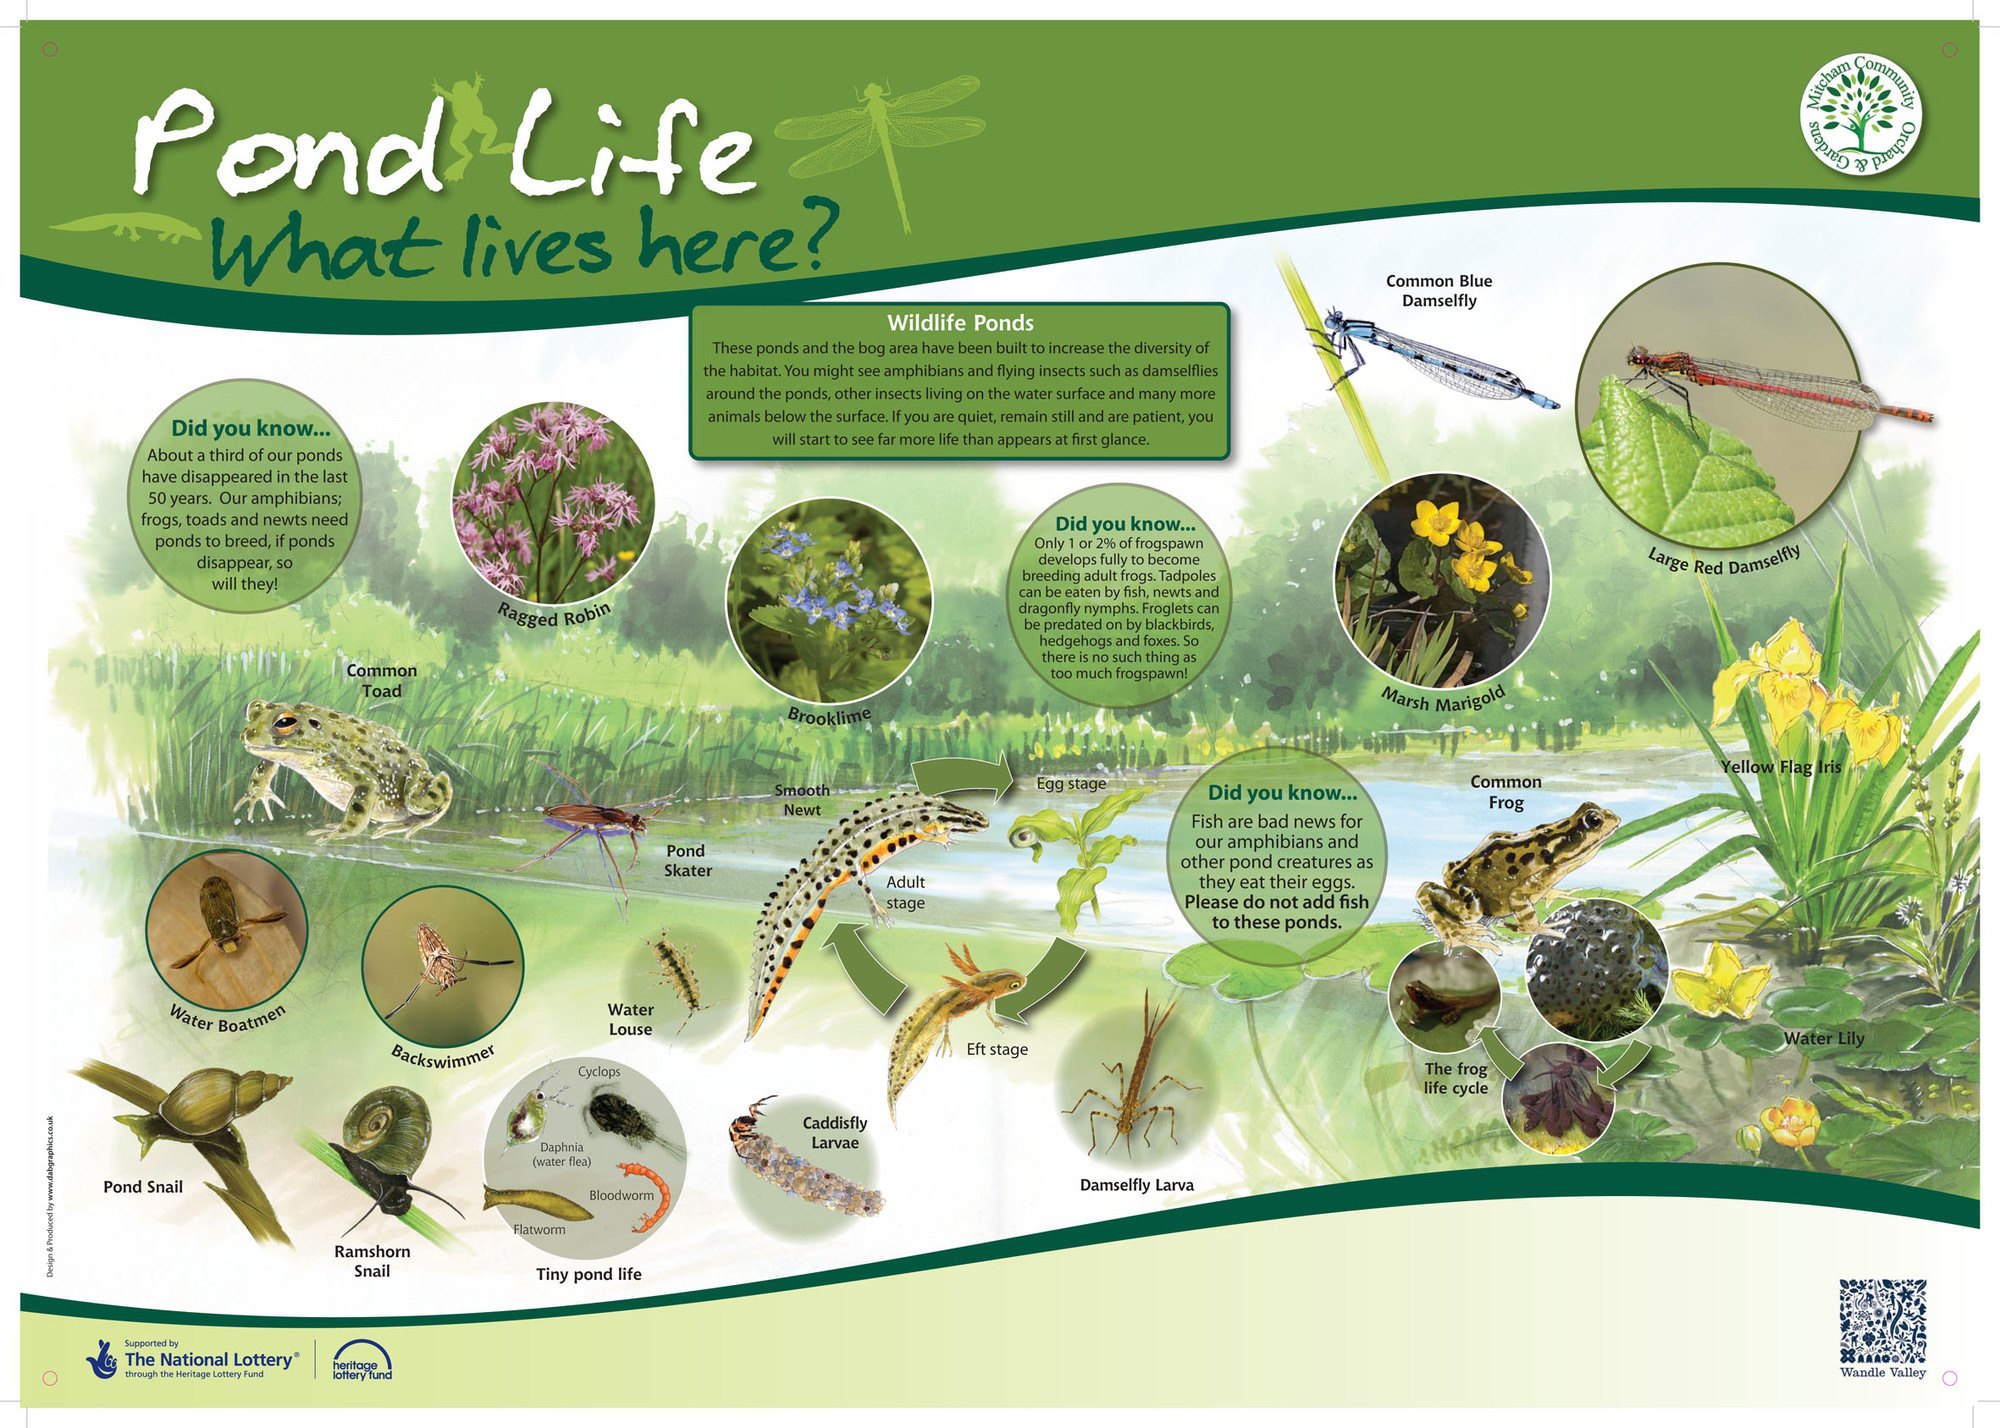 Pond Life at Mitcham Community Orchard • Wandle Valley